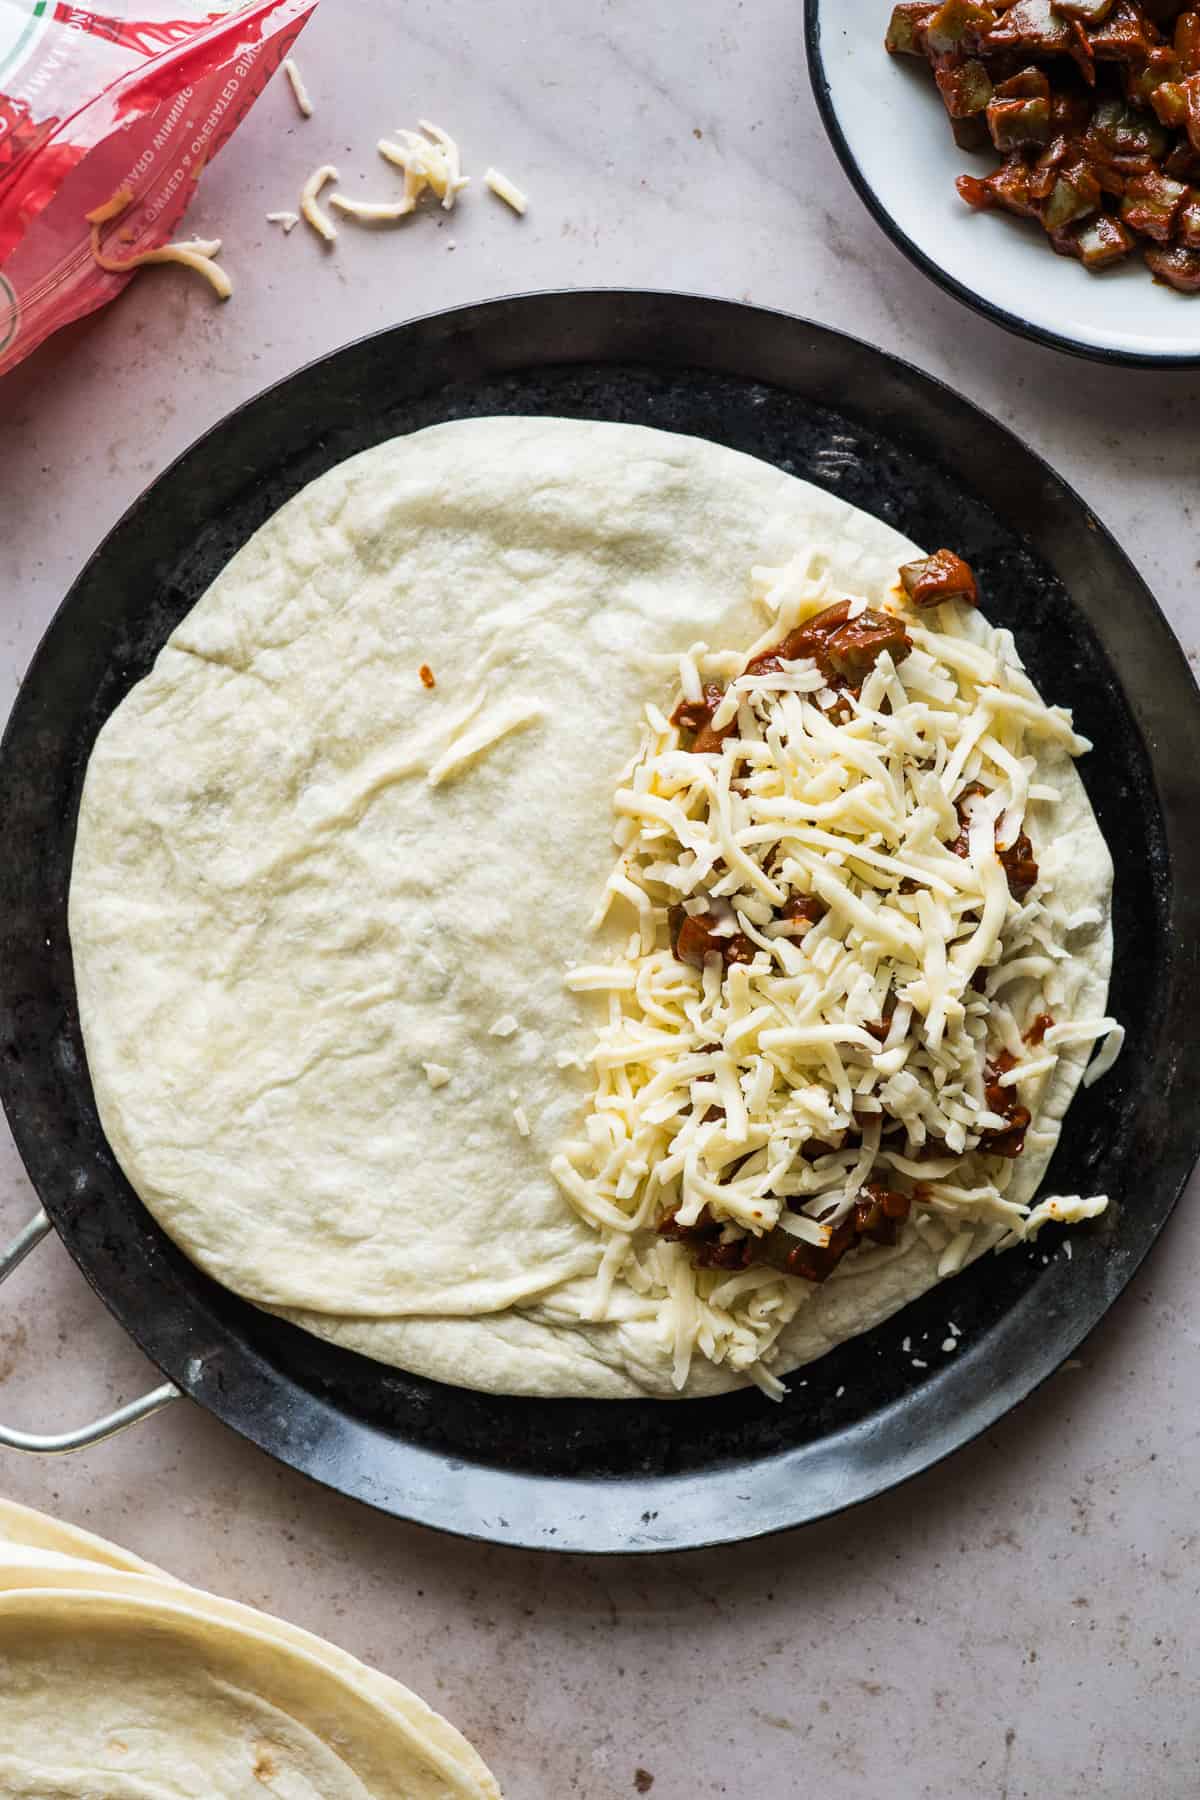 A flour tortilla layered with Chihuahua Mexican cheese, nopales en chile rojo, and more cheese.